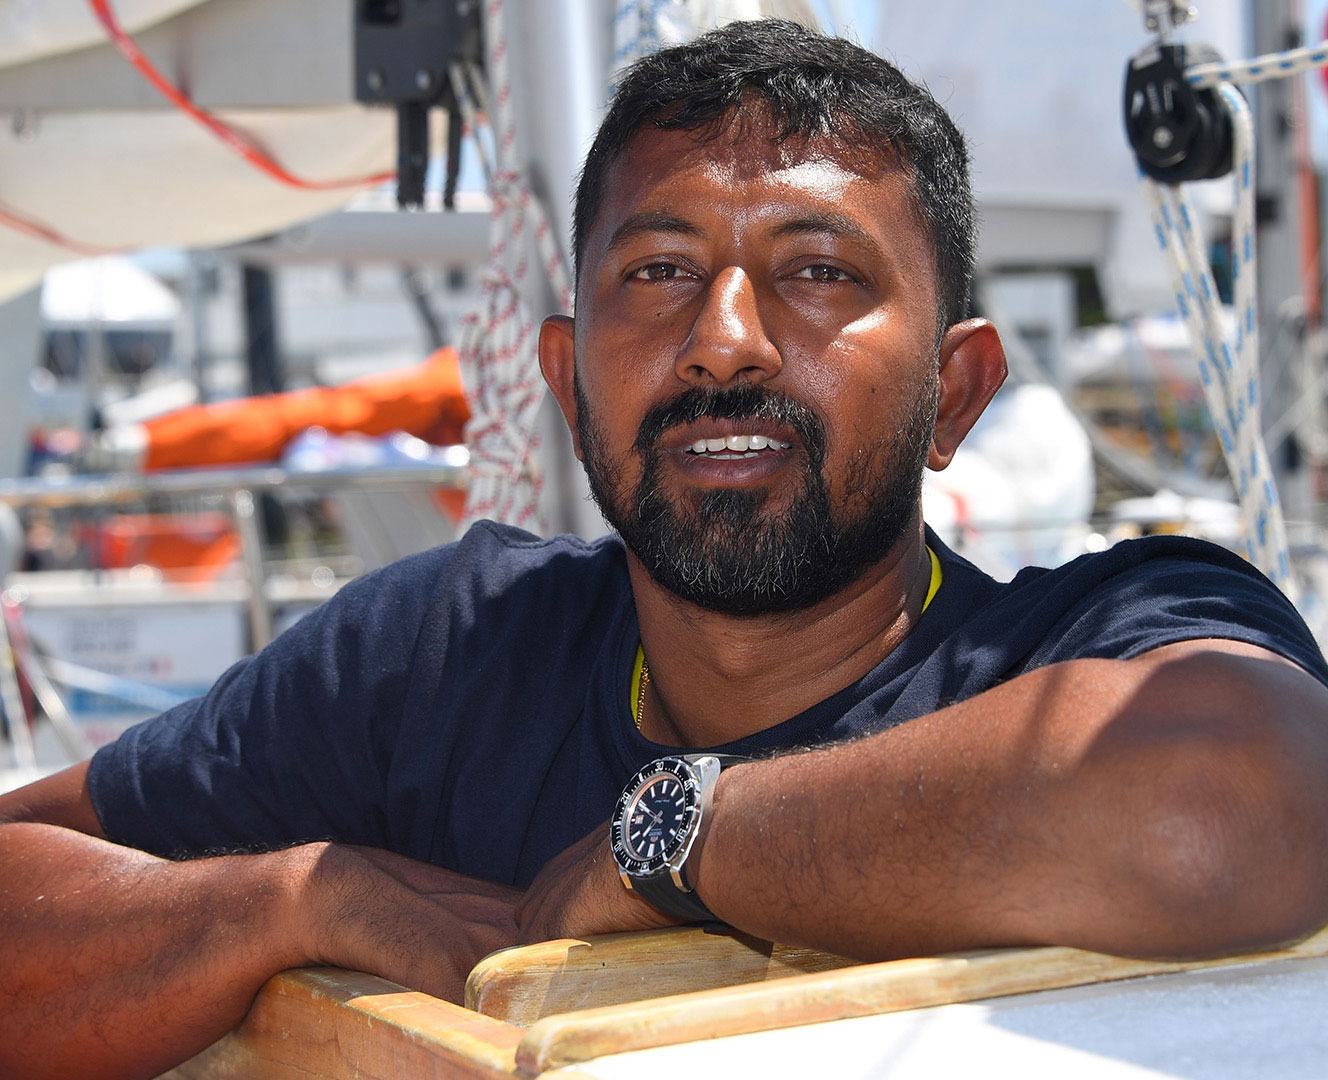 Injured Navy Commander Abhilash Tomy to be picked up by French vessel in next 16 hours: Def Min